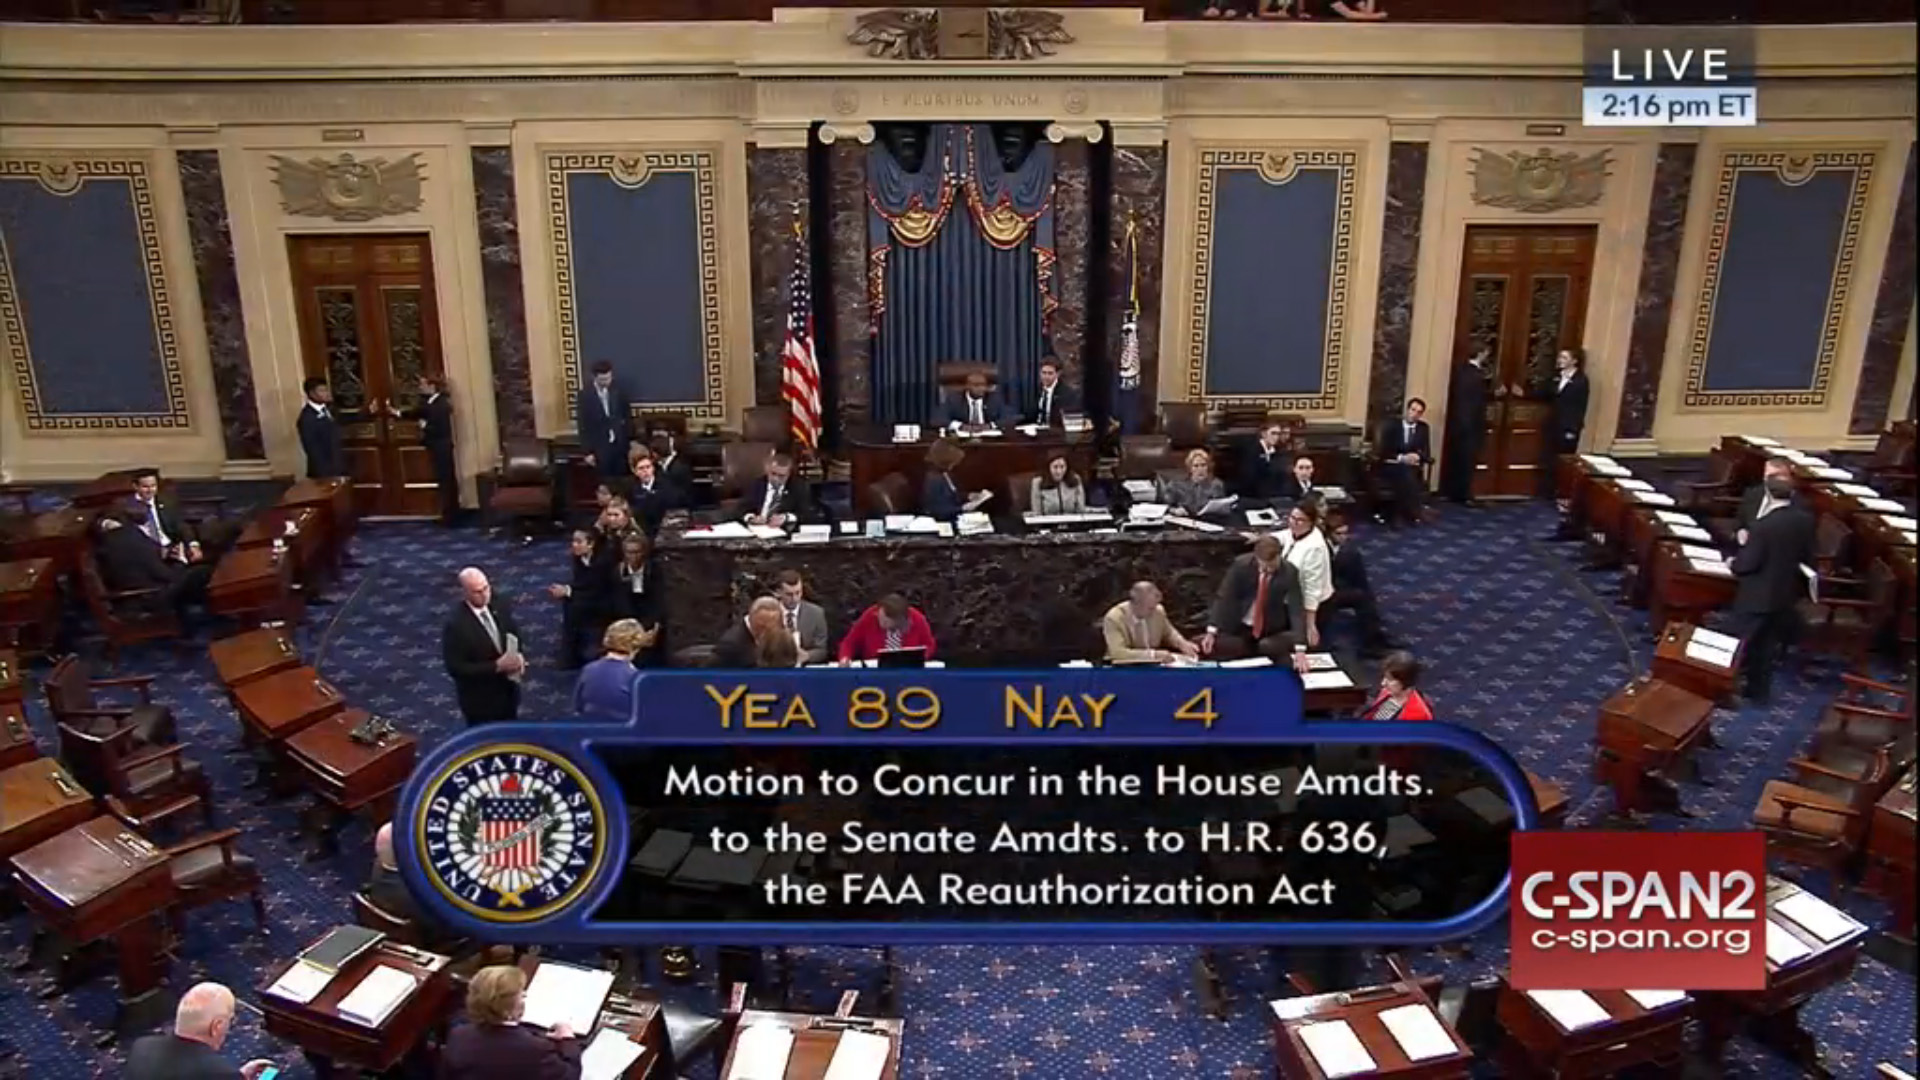 The U.S. Senate overwhelmingly approved legislation that includes medical reform on July 13. Image from C-Span.